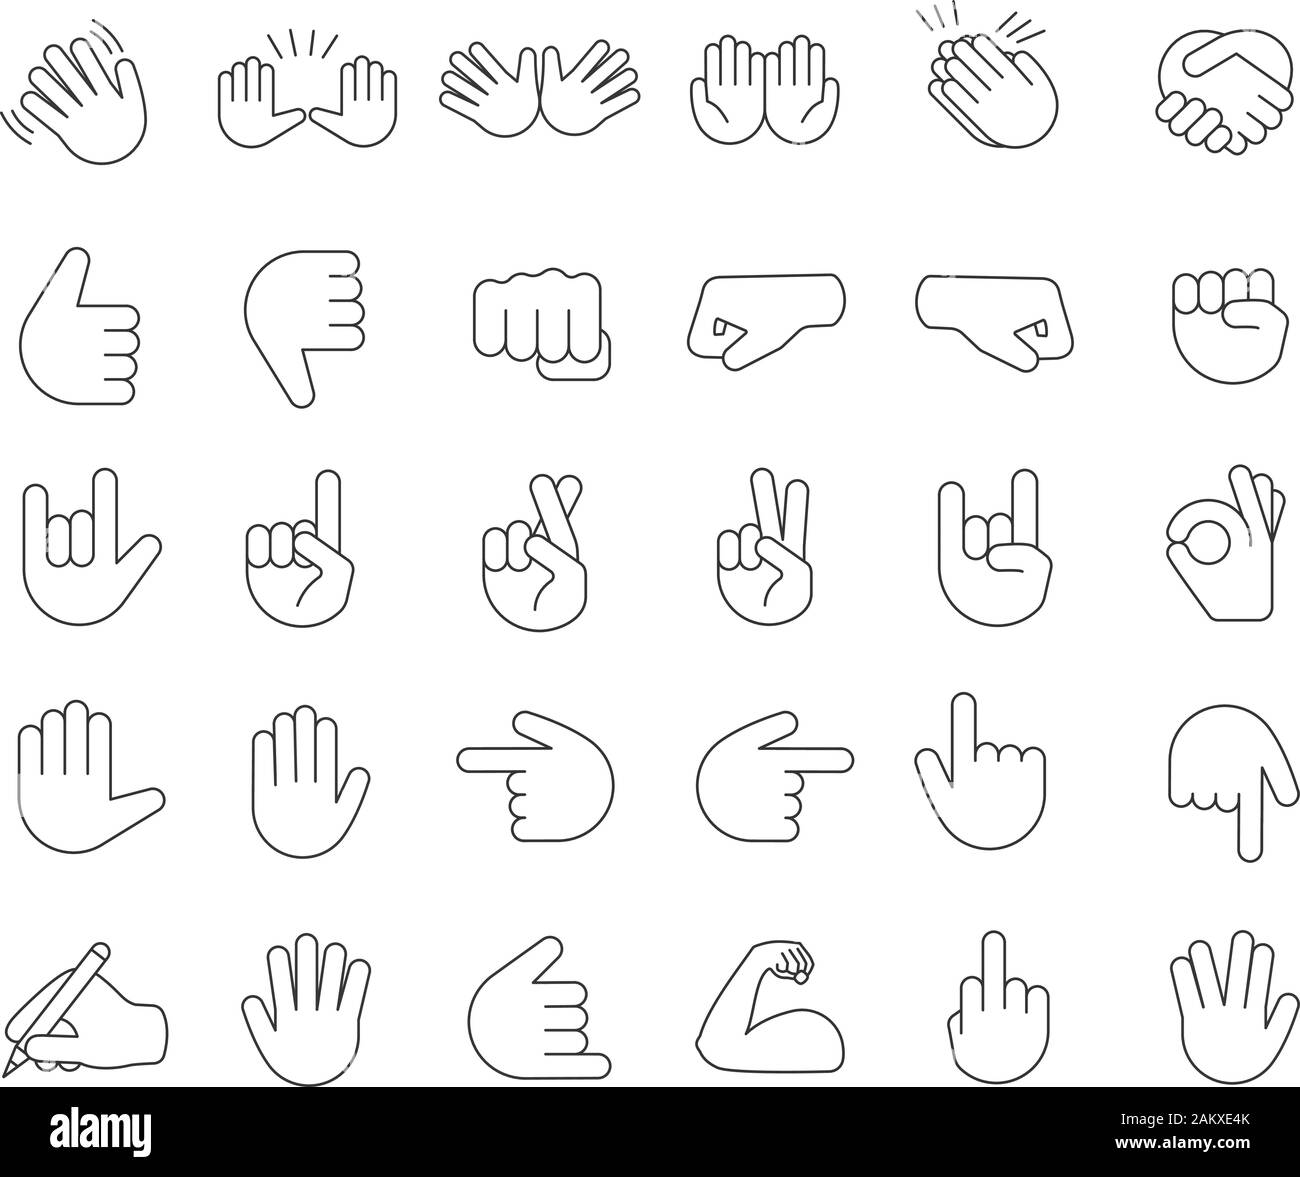 Hand gesture emojis linear icons set. Thin line contour symbols. Pointing fingers, fists, palms. Social media, network emoticons. Hand symbols. Isolat Stock Vector